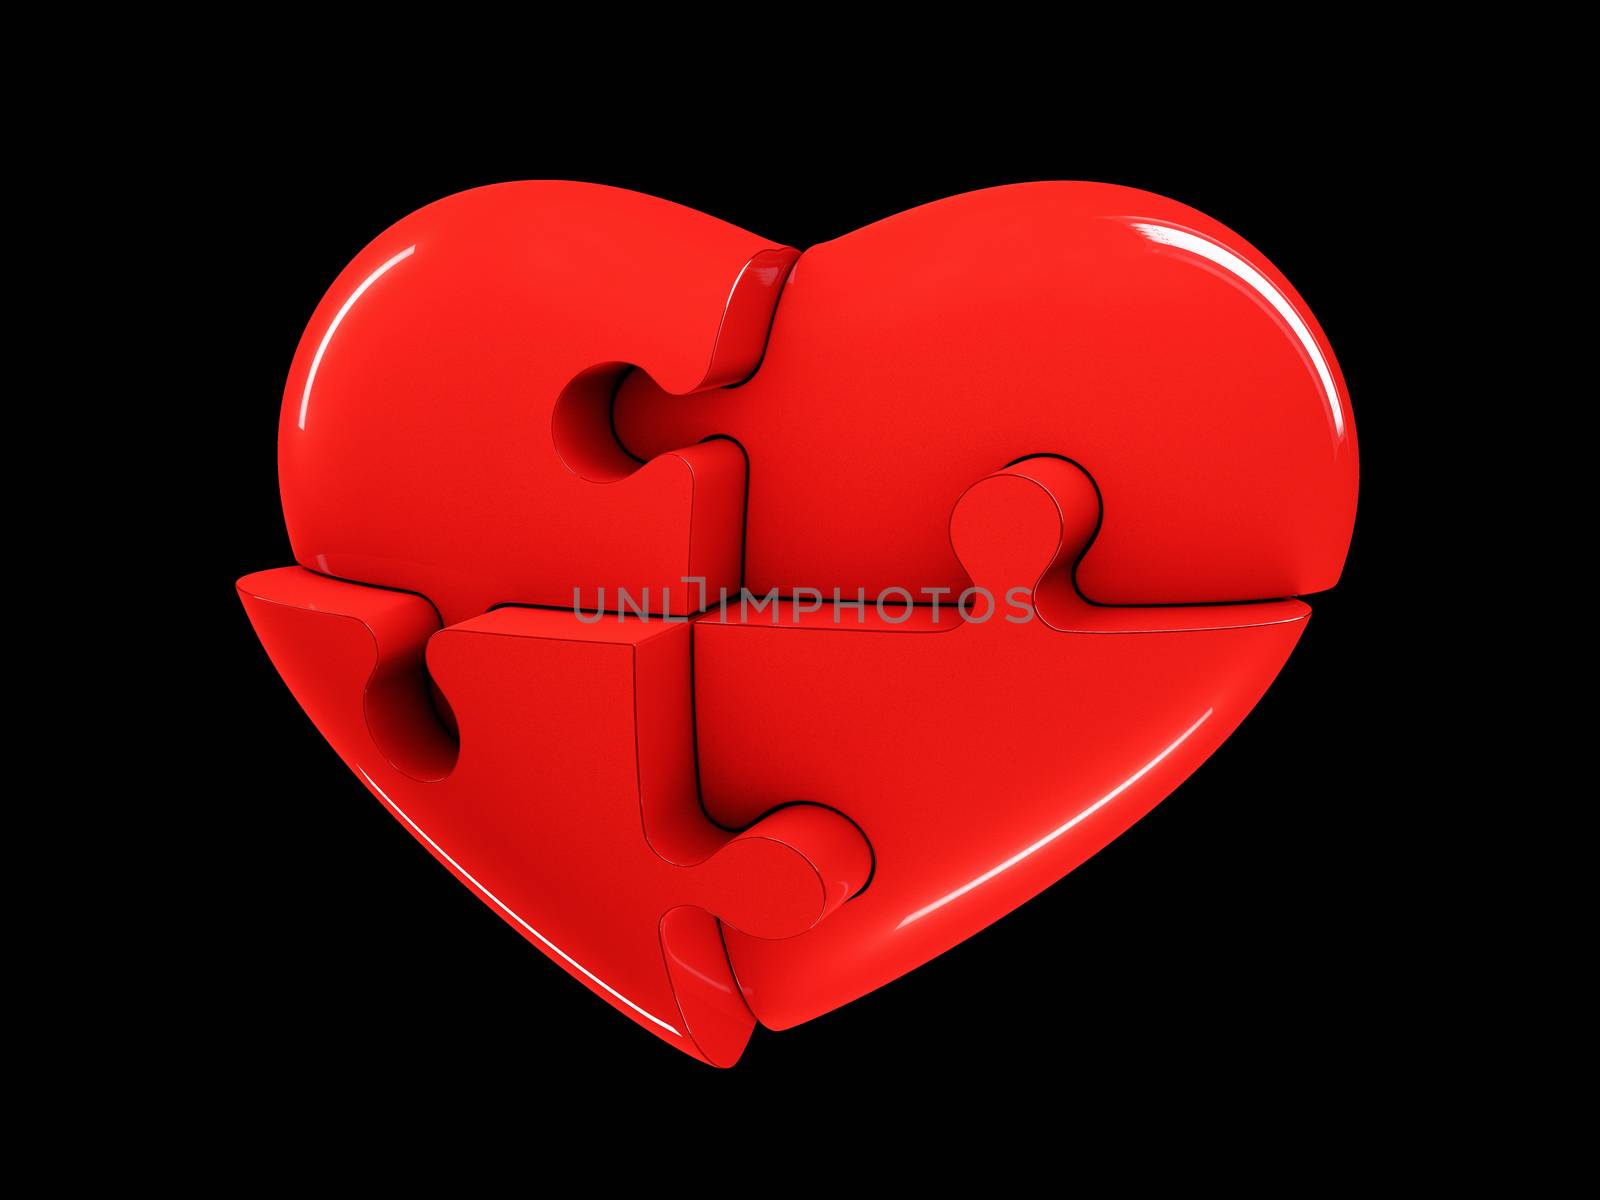 Red jigsaw puzzle heart diagram 3d illustration isolated on black background by tussik